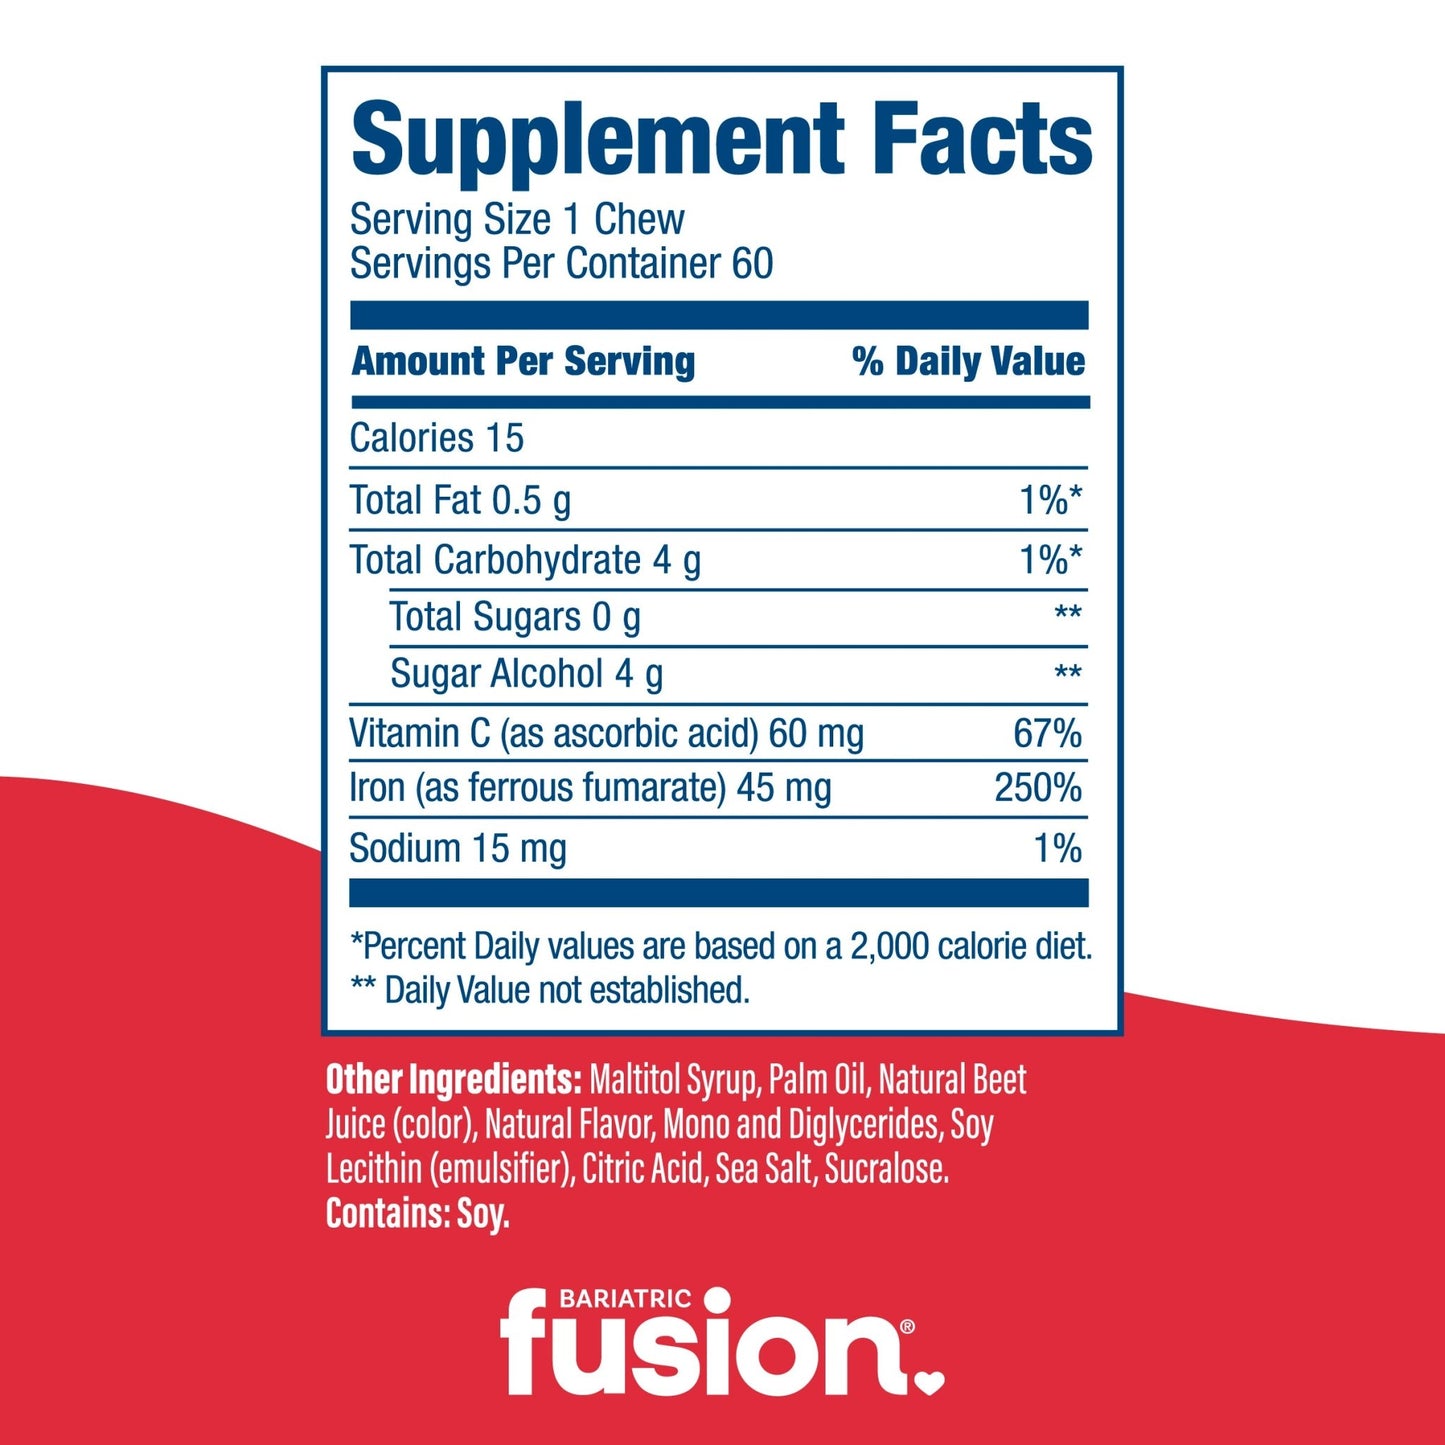 Cherry Bariatric Iron Soft Chew with Vitamin C supplement facts.